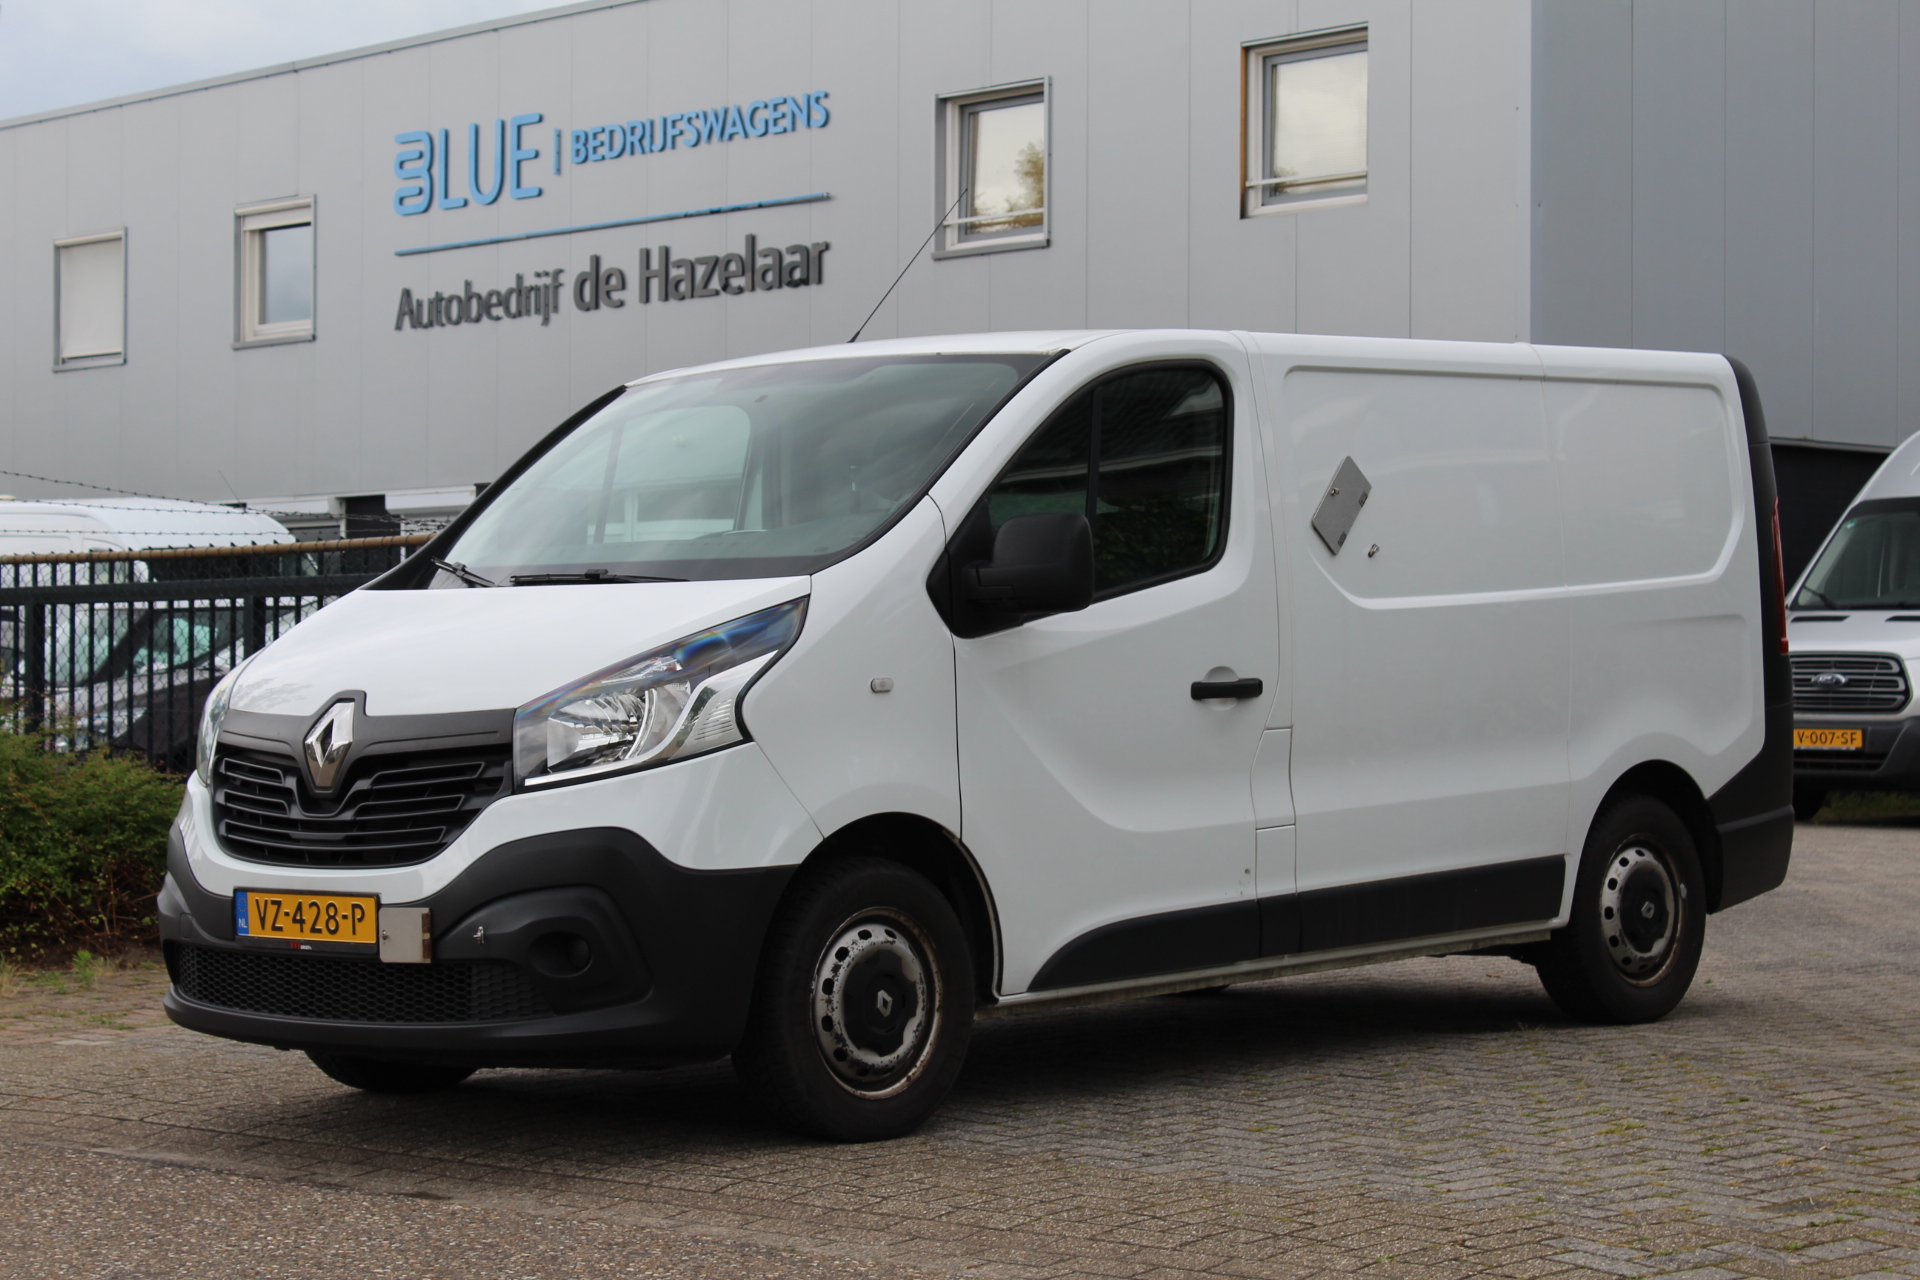 Renault Trafic 1.6 dCi 95PK Euro6 T27 L1H1 Comfort ✓airco ✓cruise ✓trekhaak ✓inrichting